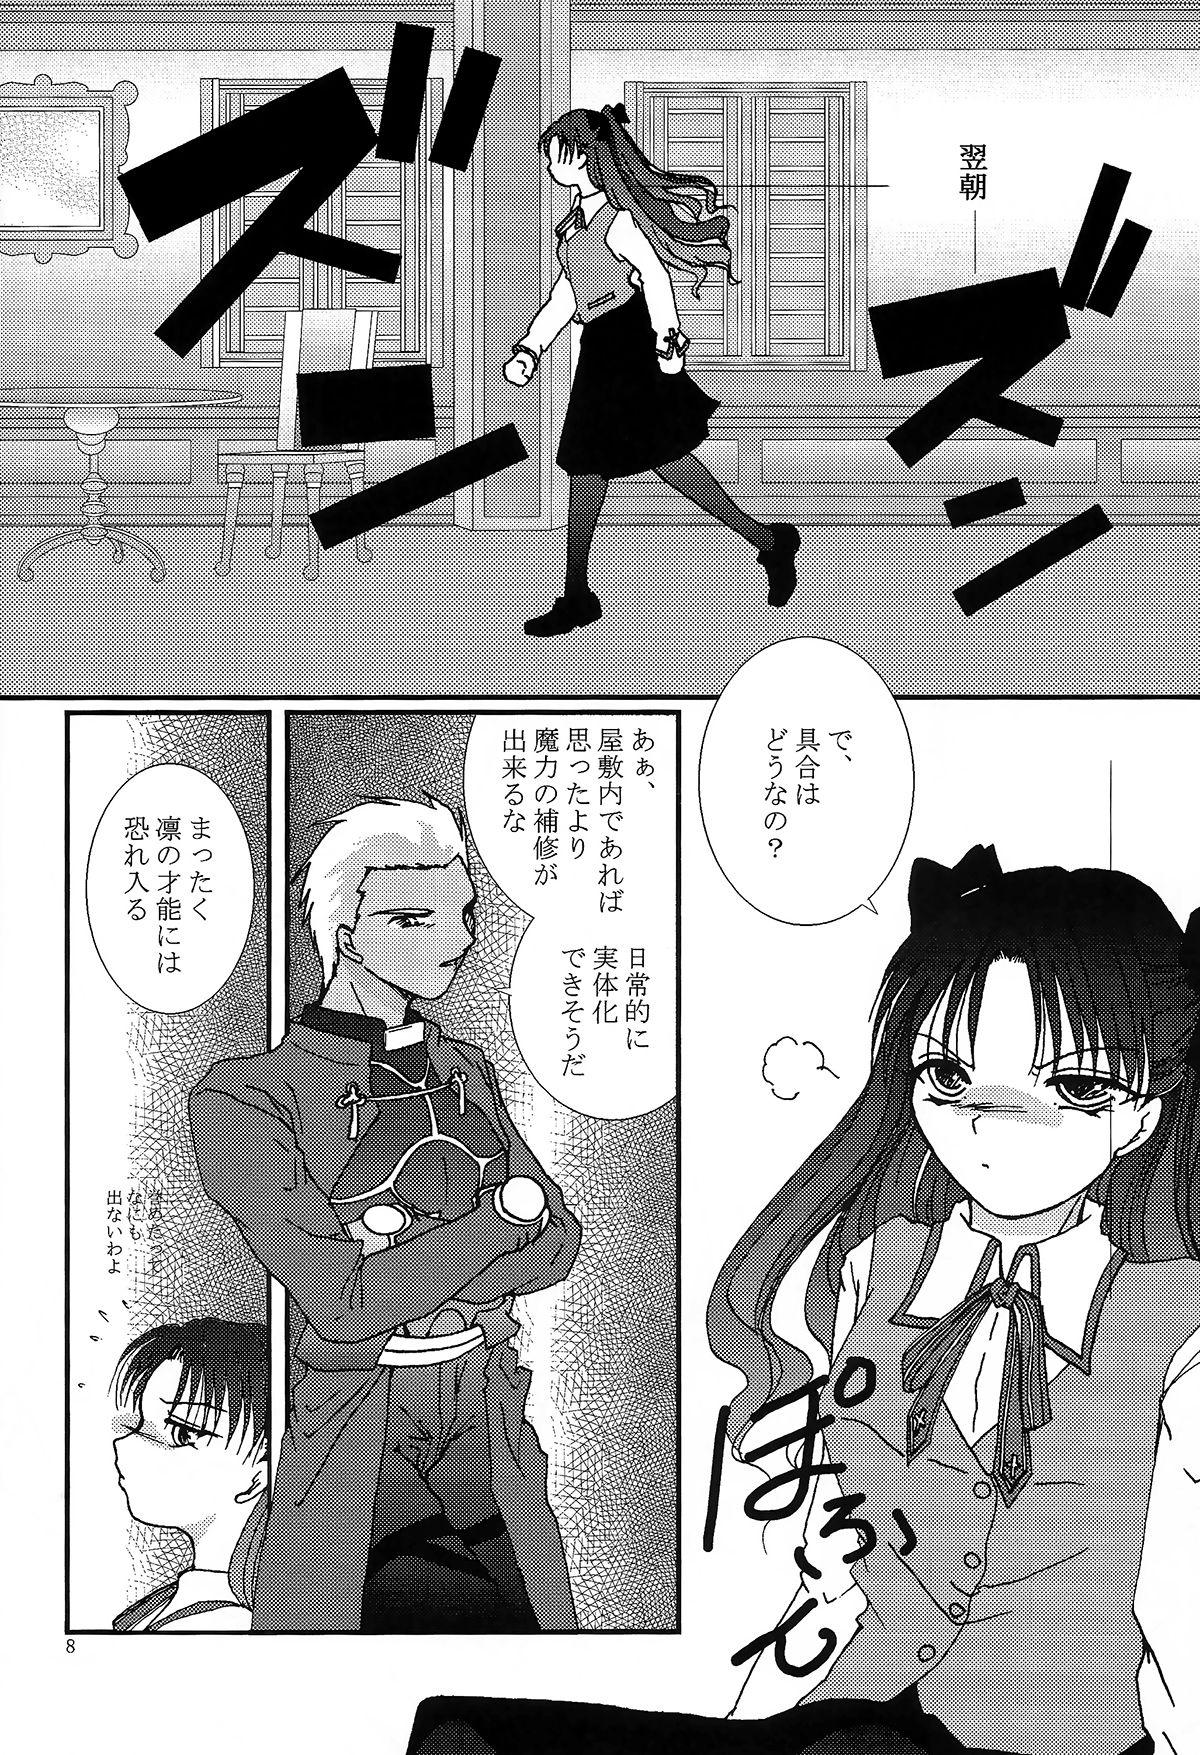 Masturbando Question-7 - Fate stay night Shaved - Page 6